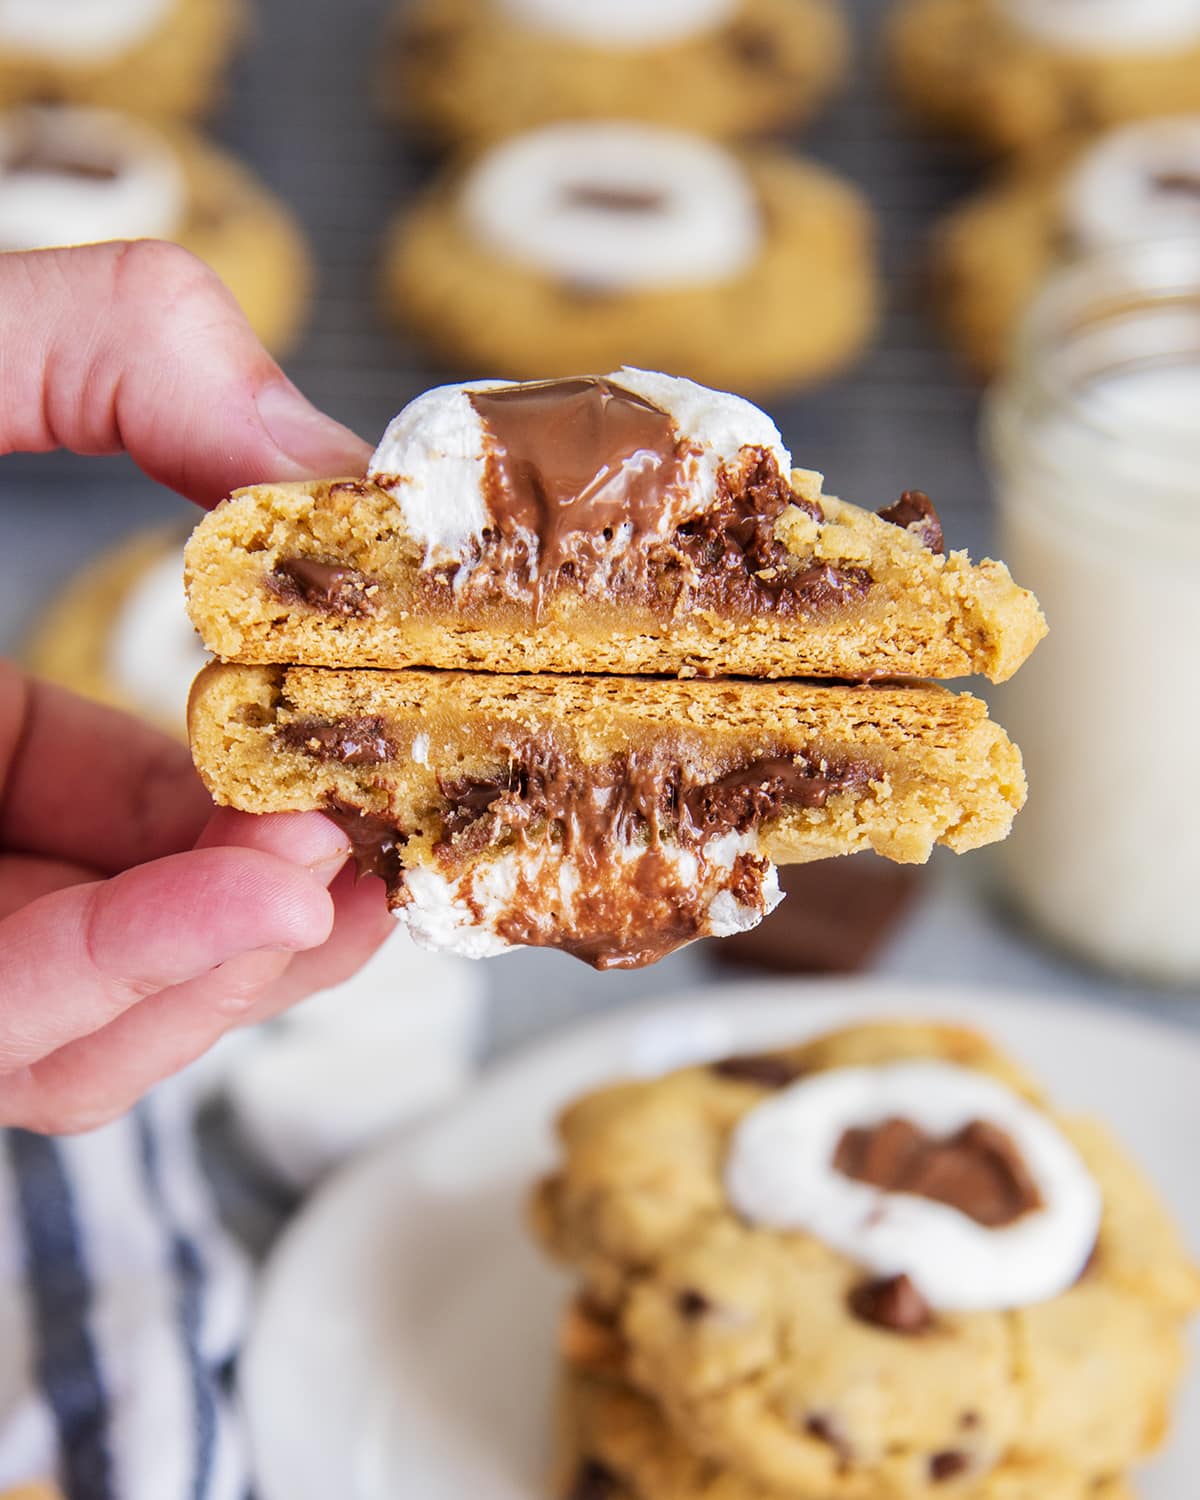 A hand holding two halves of a s'mores cookie showing the gooey inside of the cookie, and graham cracker on the bottom.